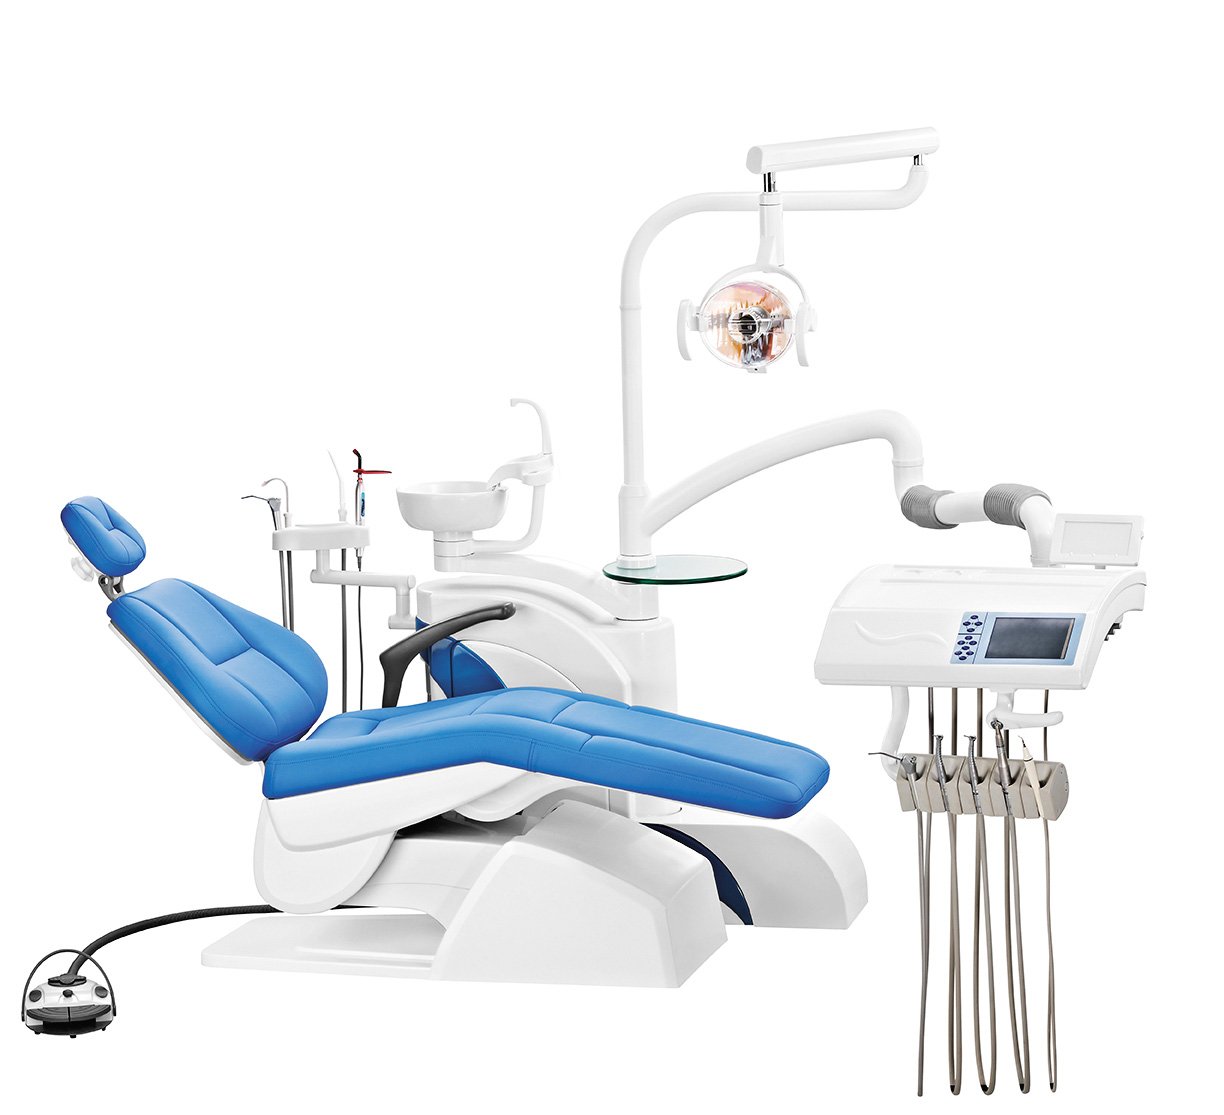 dentist chair images